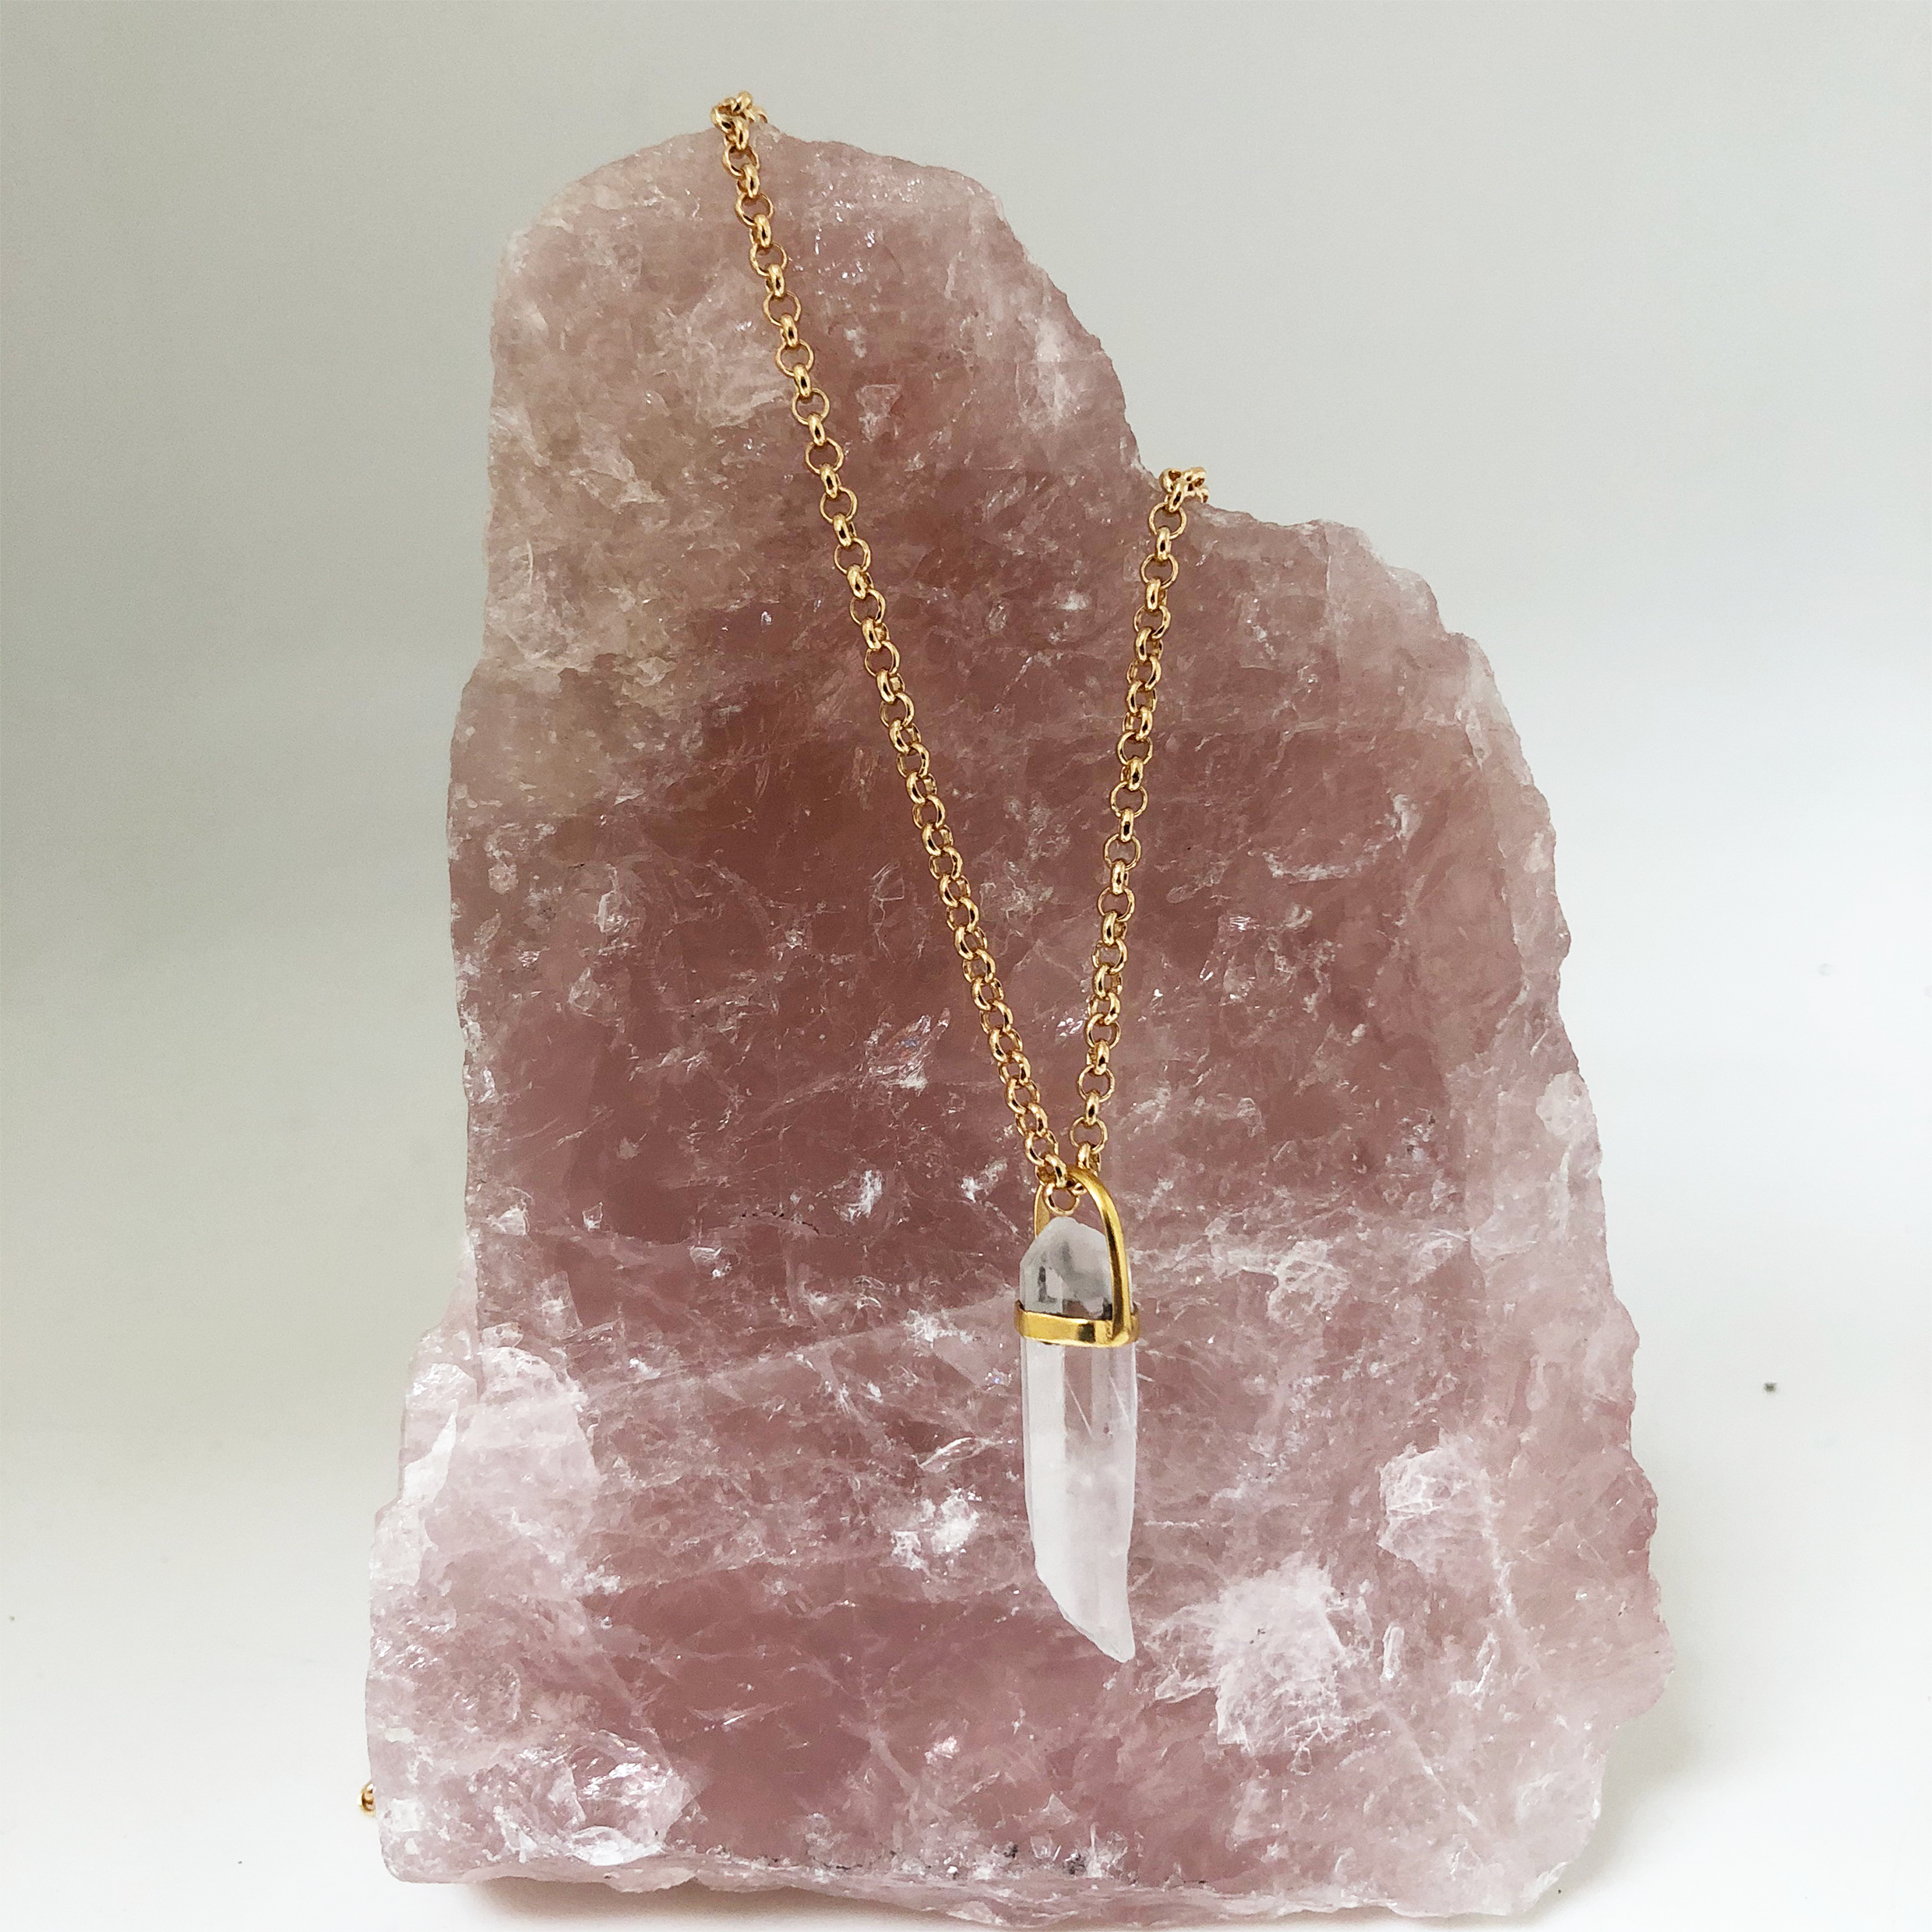 Raw Rock Crystal Point  on Baby Belcher chain